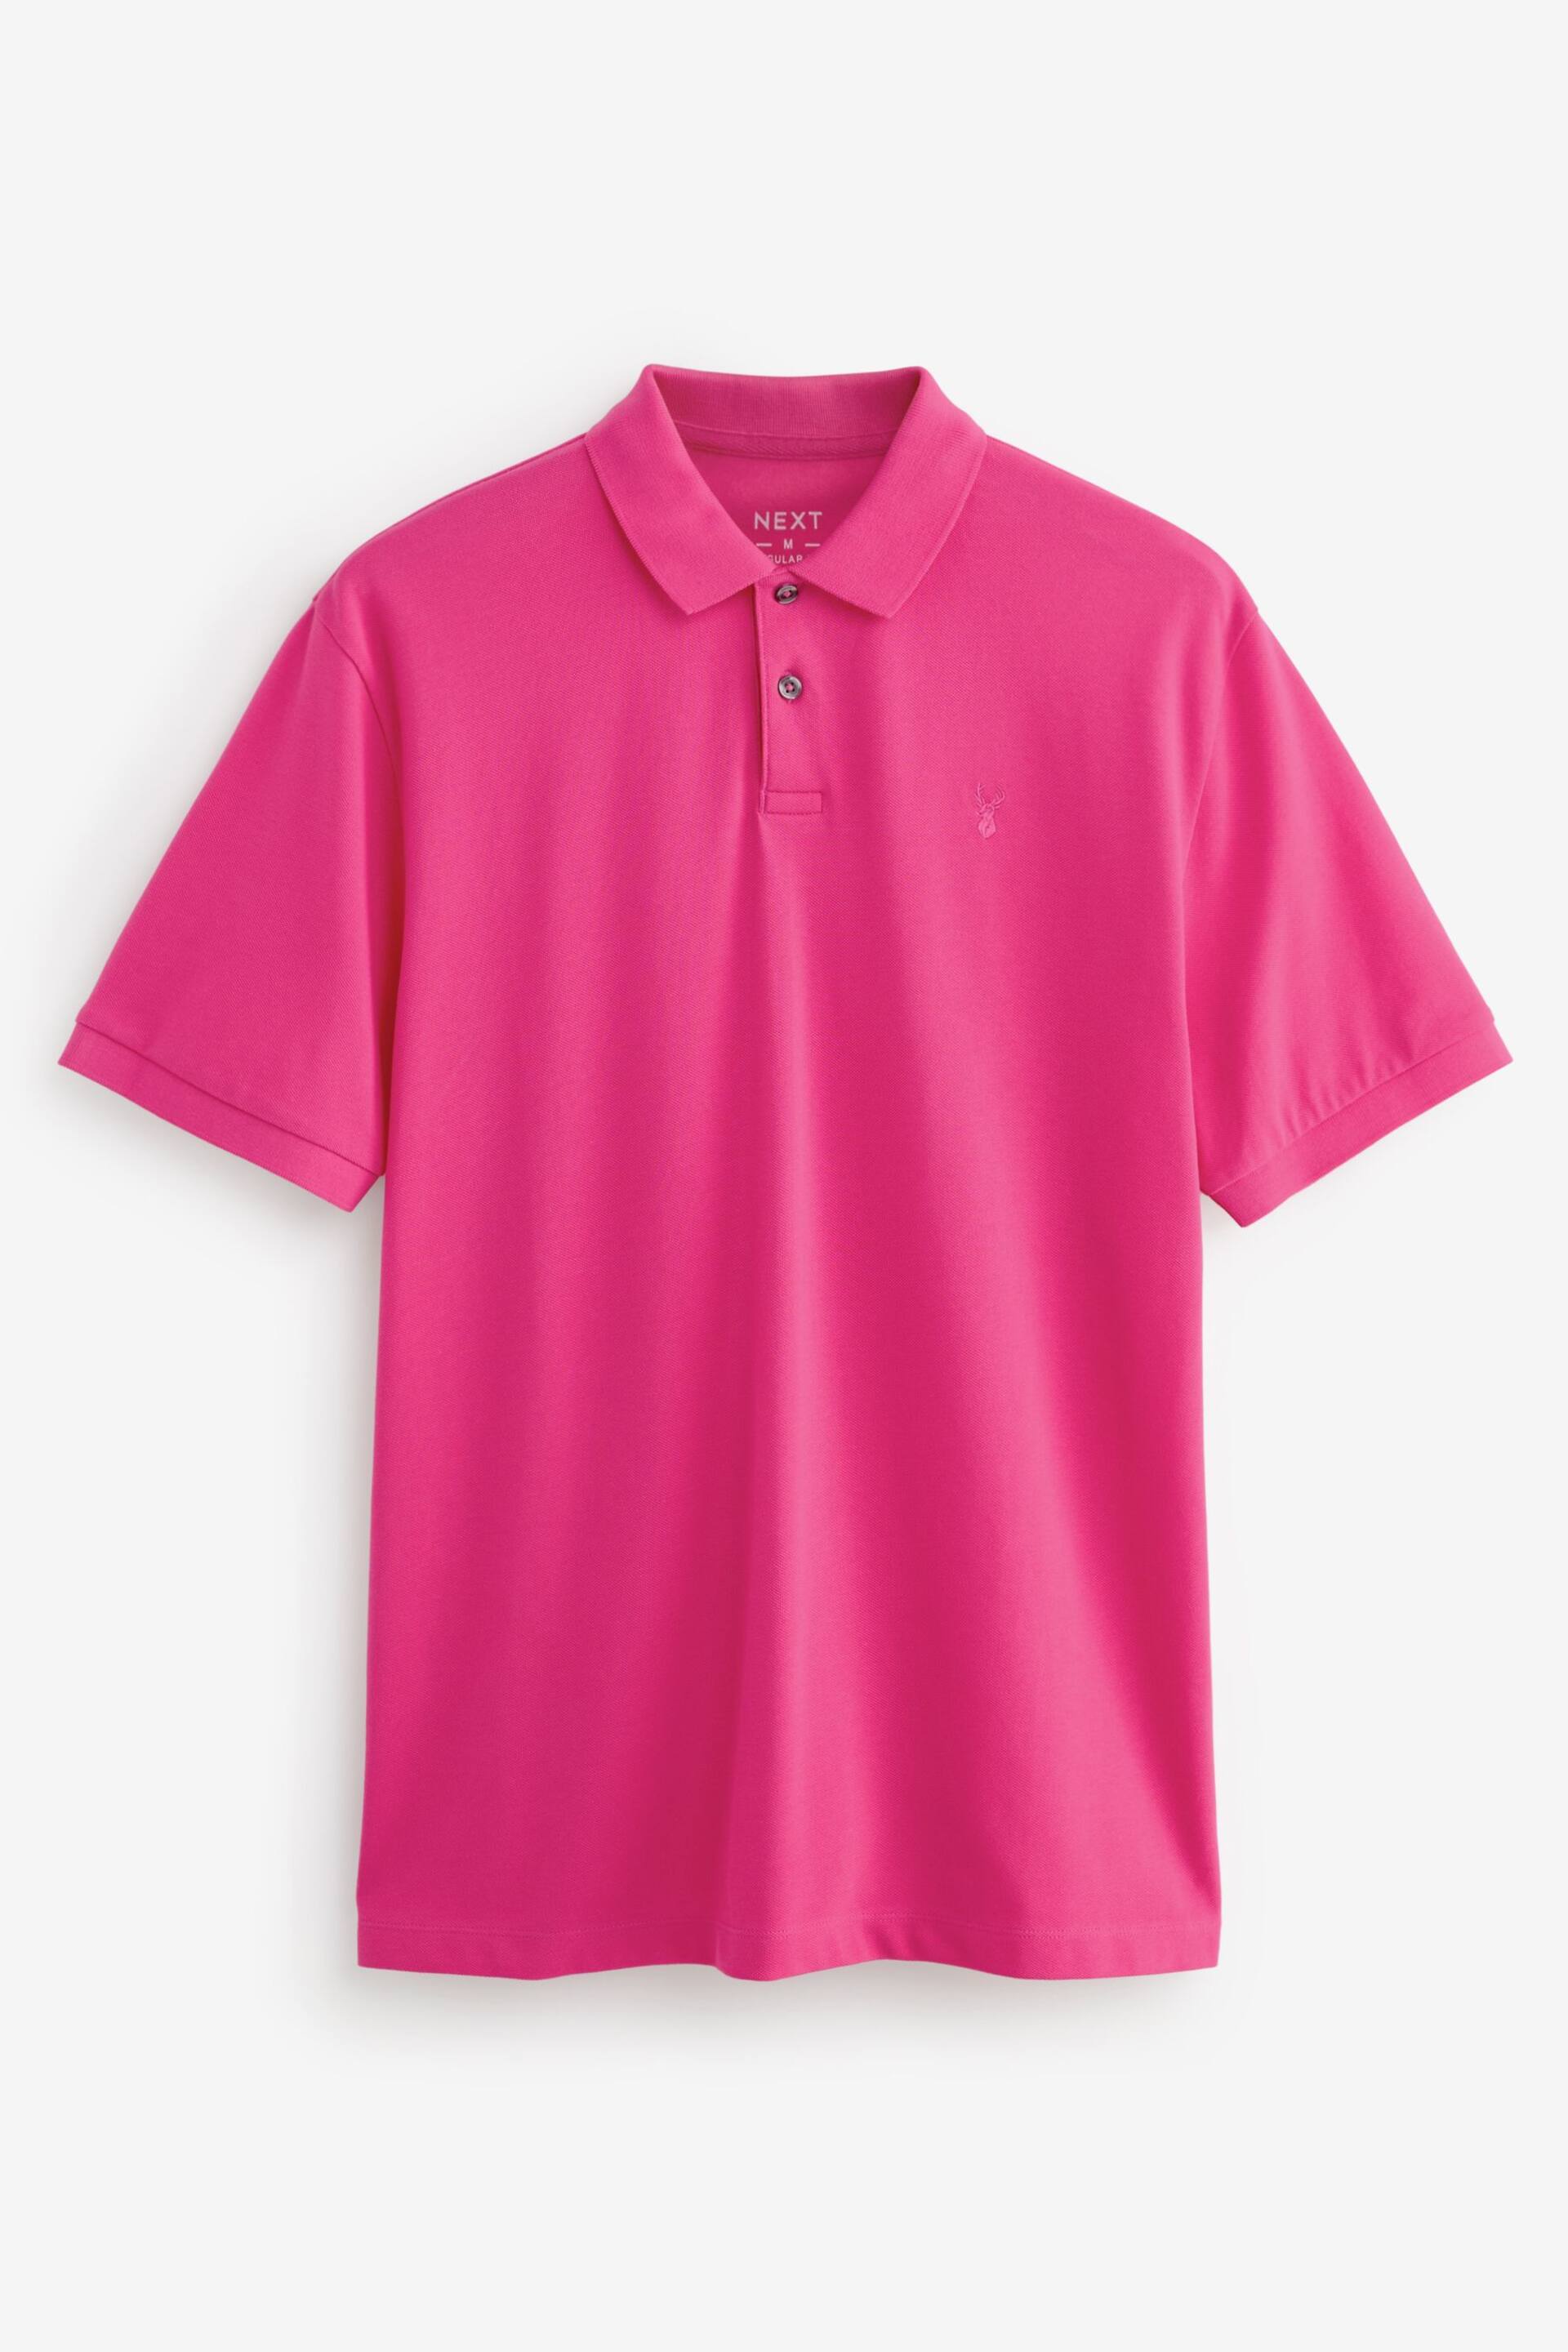 Bright Pink Regular Fit Short Sleeve Pique Polo Shirt - Image 5 of 7